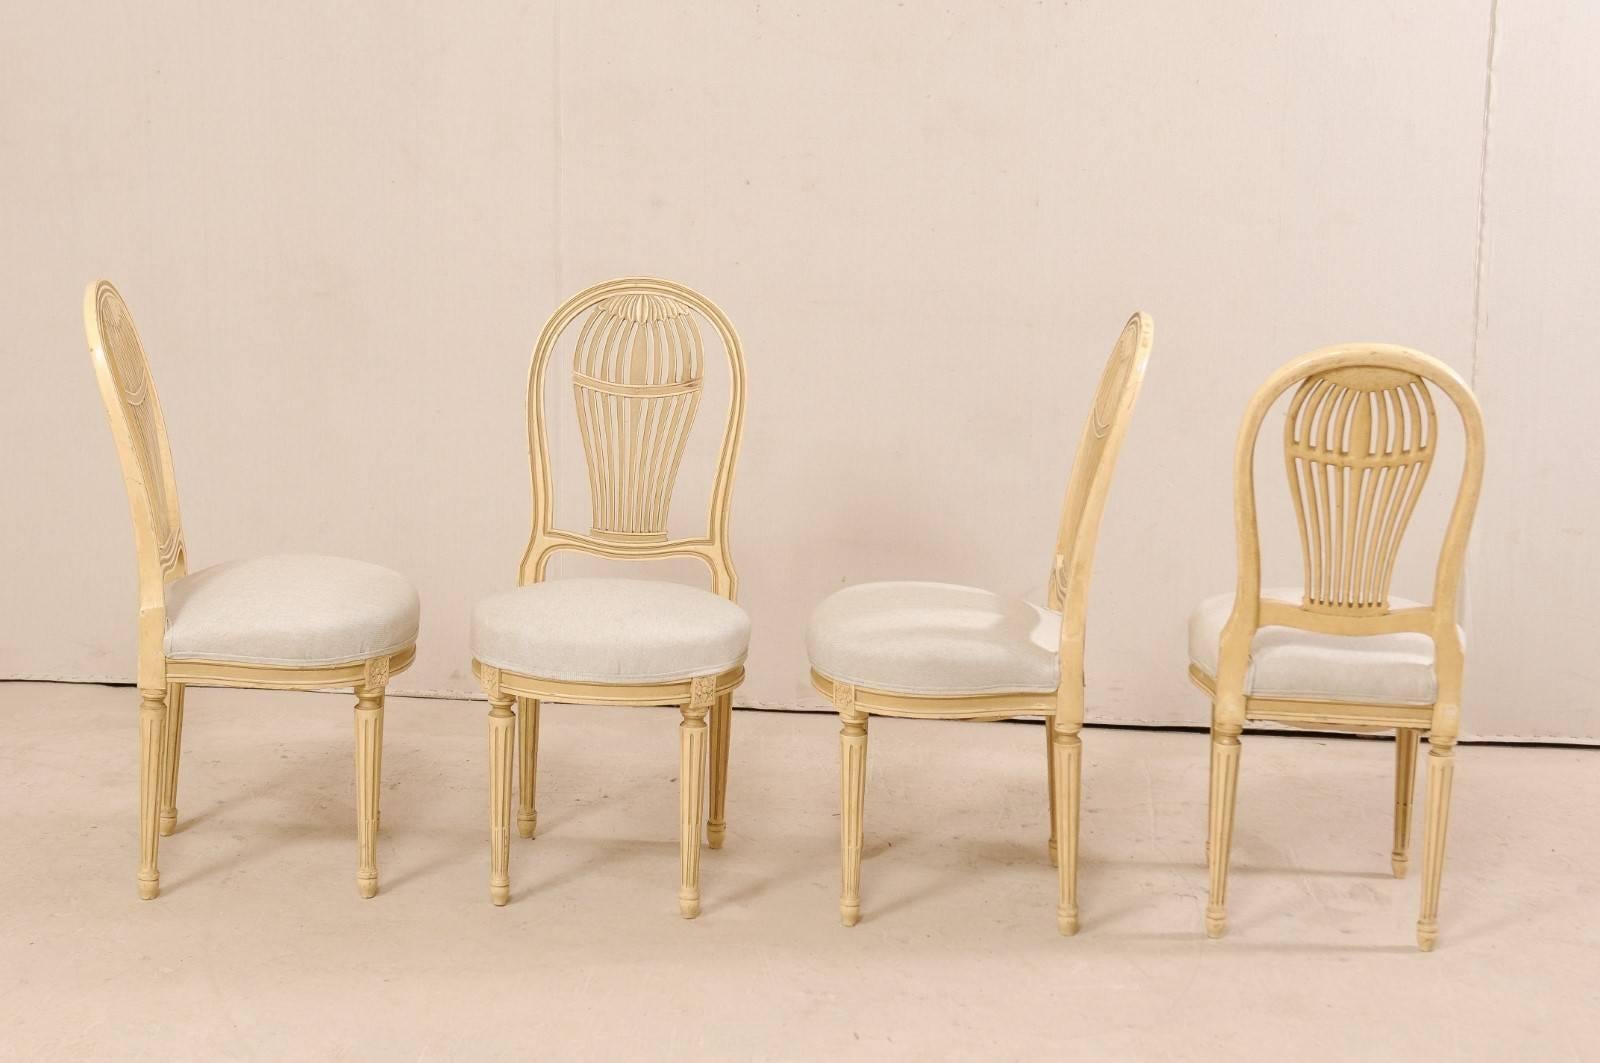 Set of Four French Louis XVI Style Painted Wood Balloon-Back Chairs (Louis XVI.)